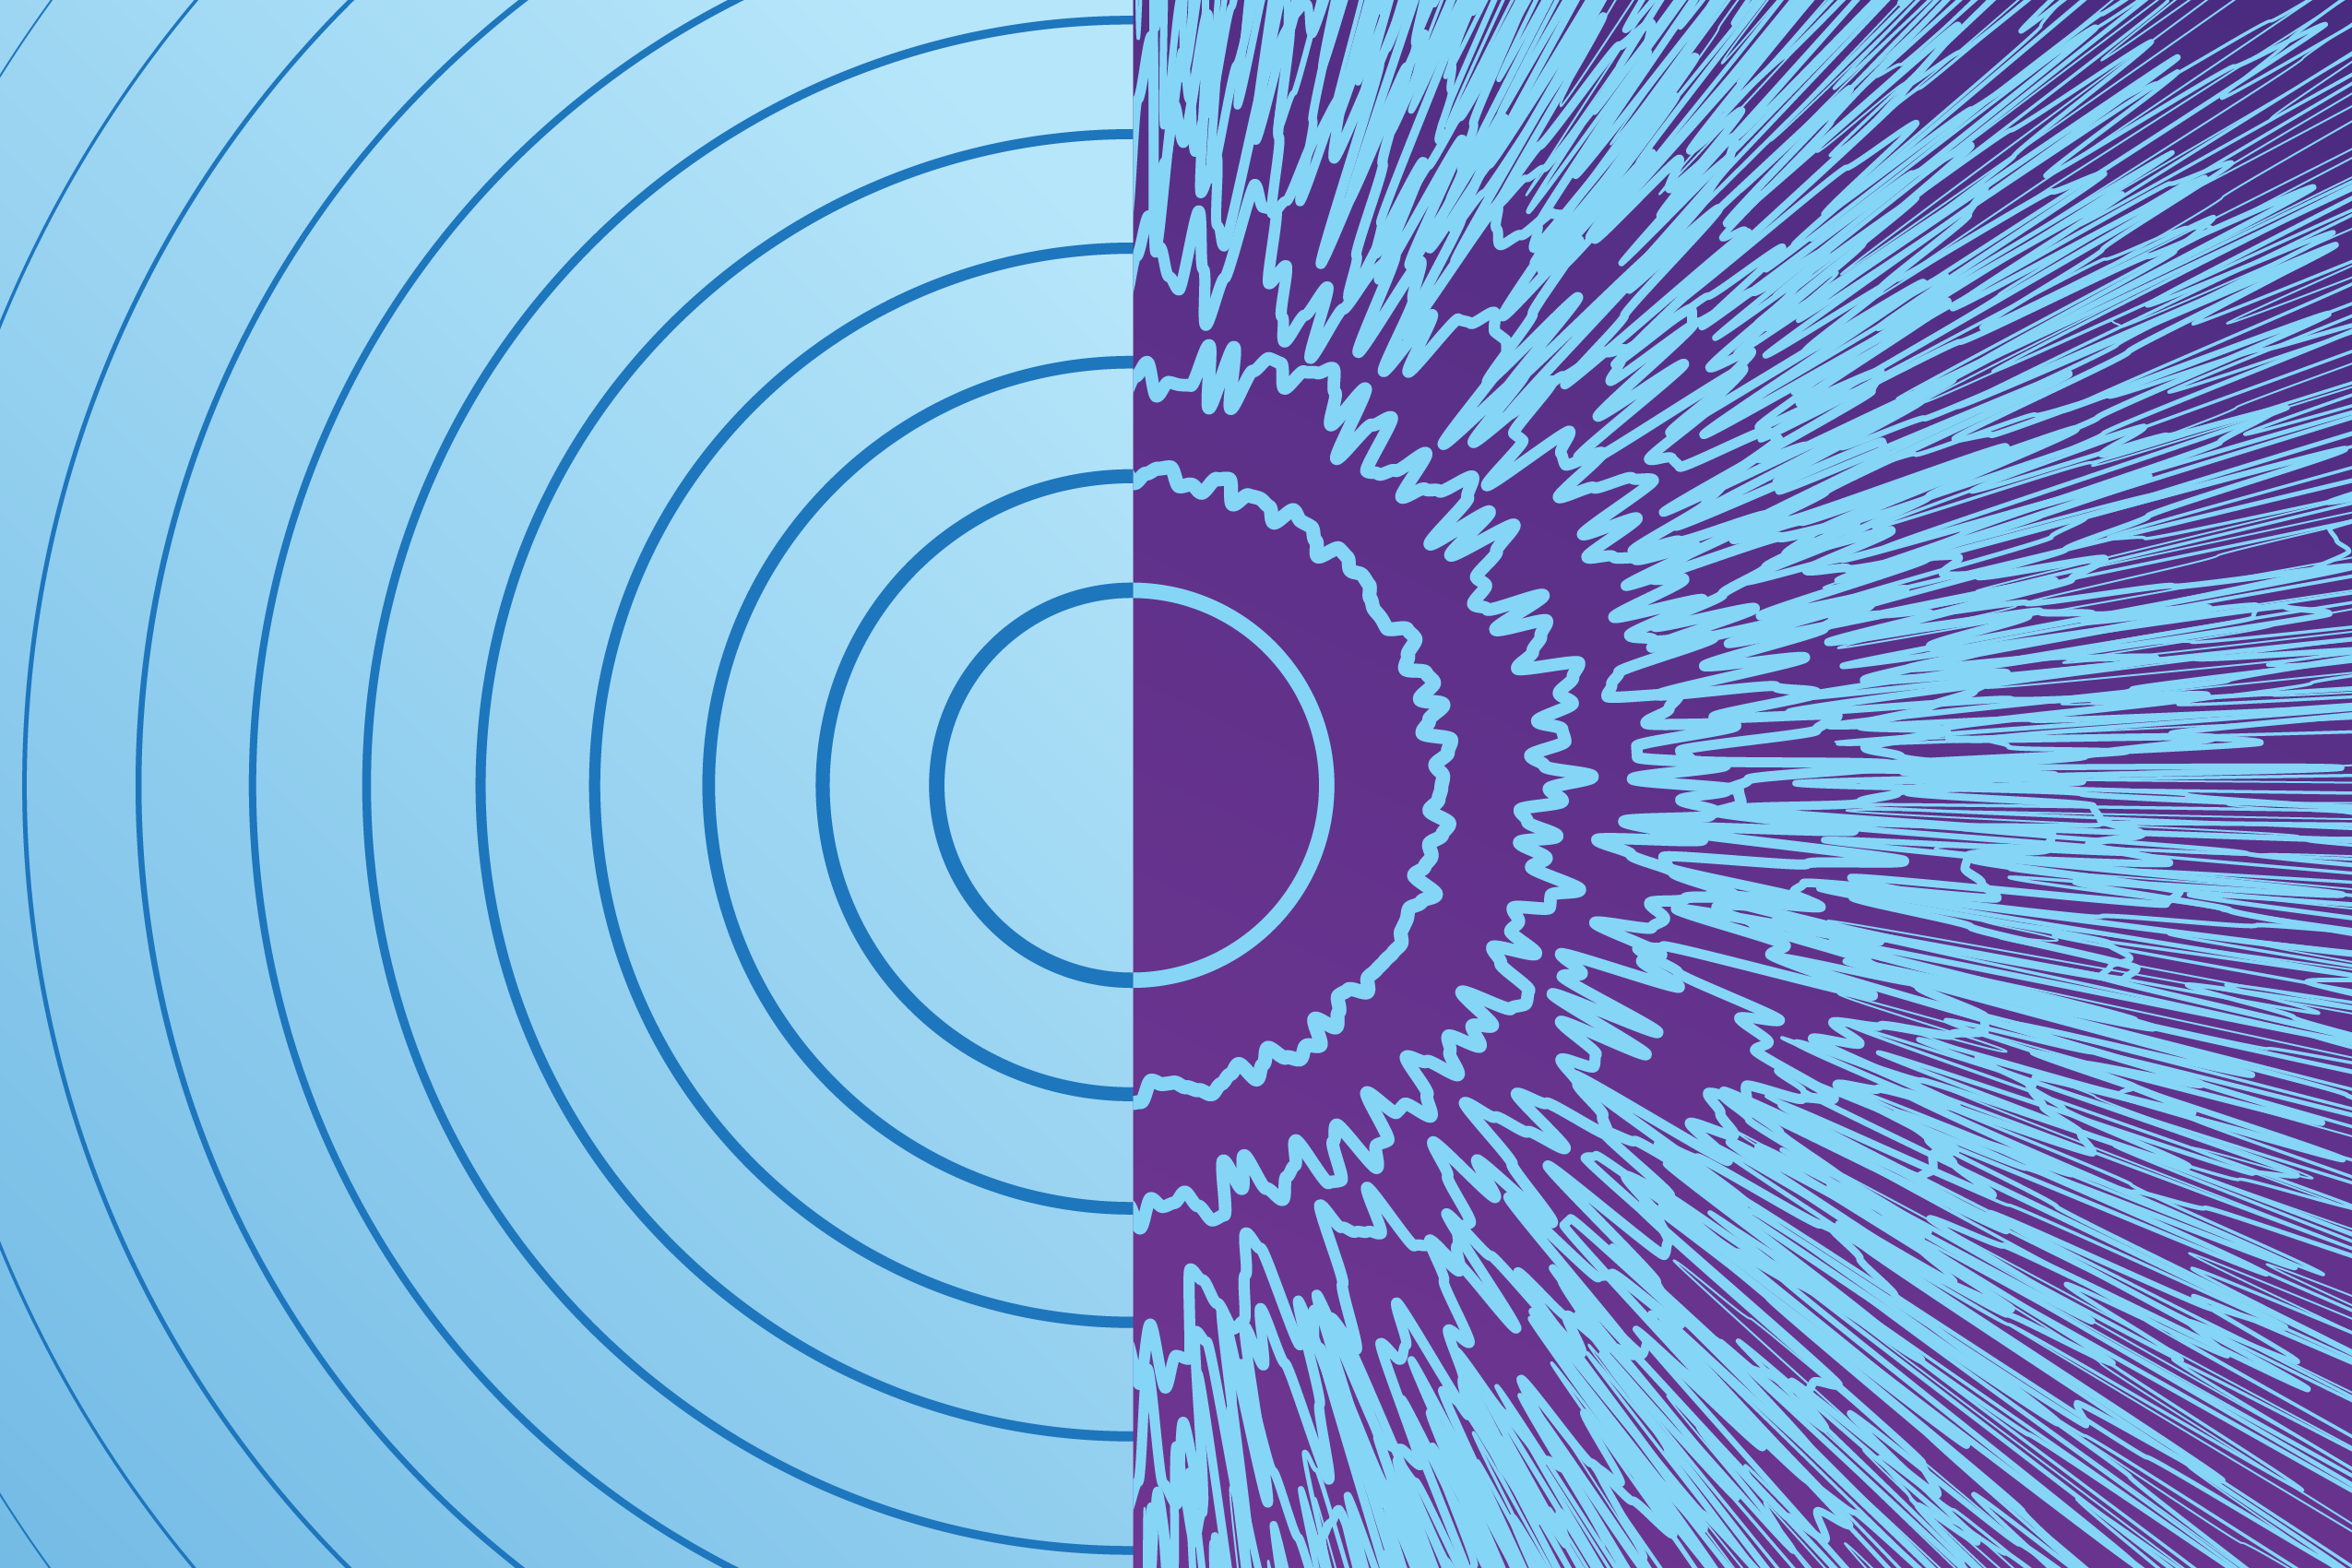 A circular pattern resembling sound waves. It represents two dueling cyber futures: one good, one bad.